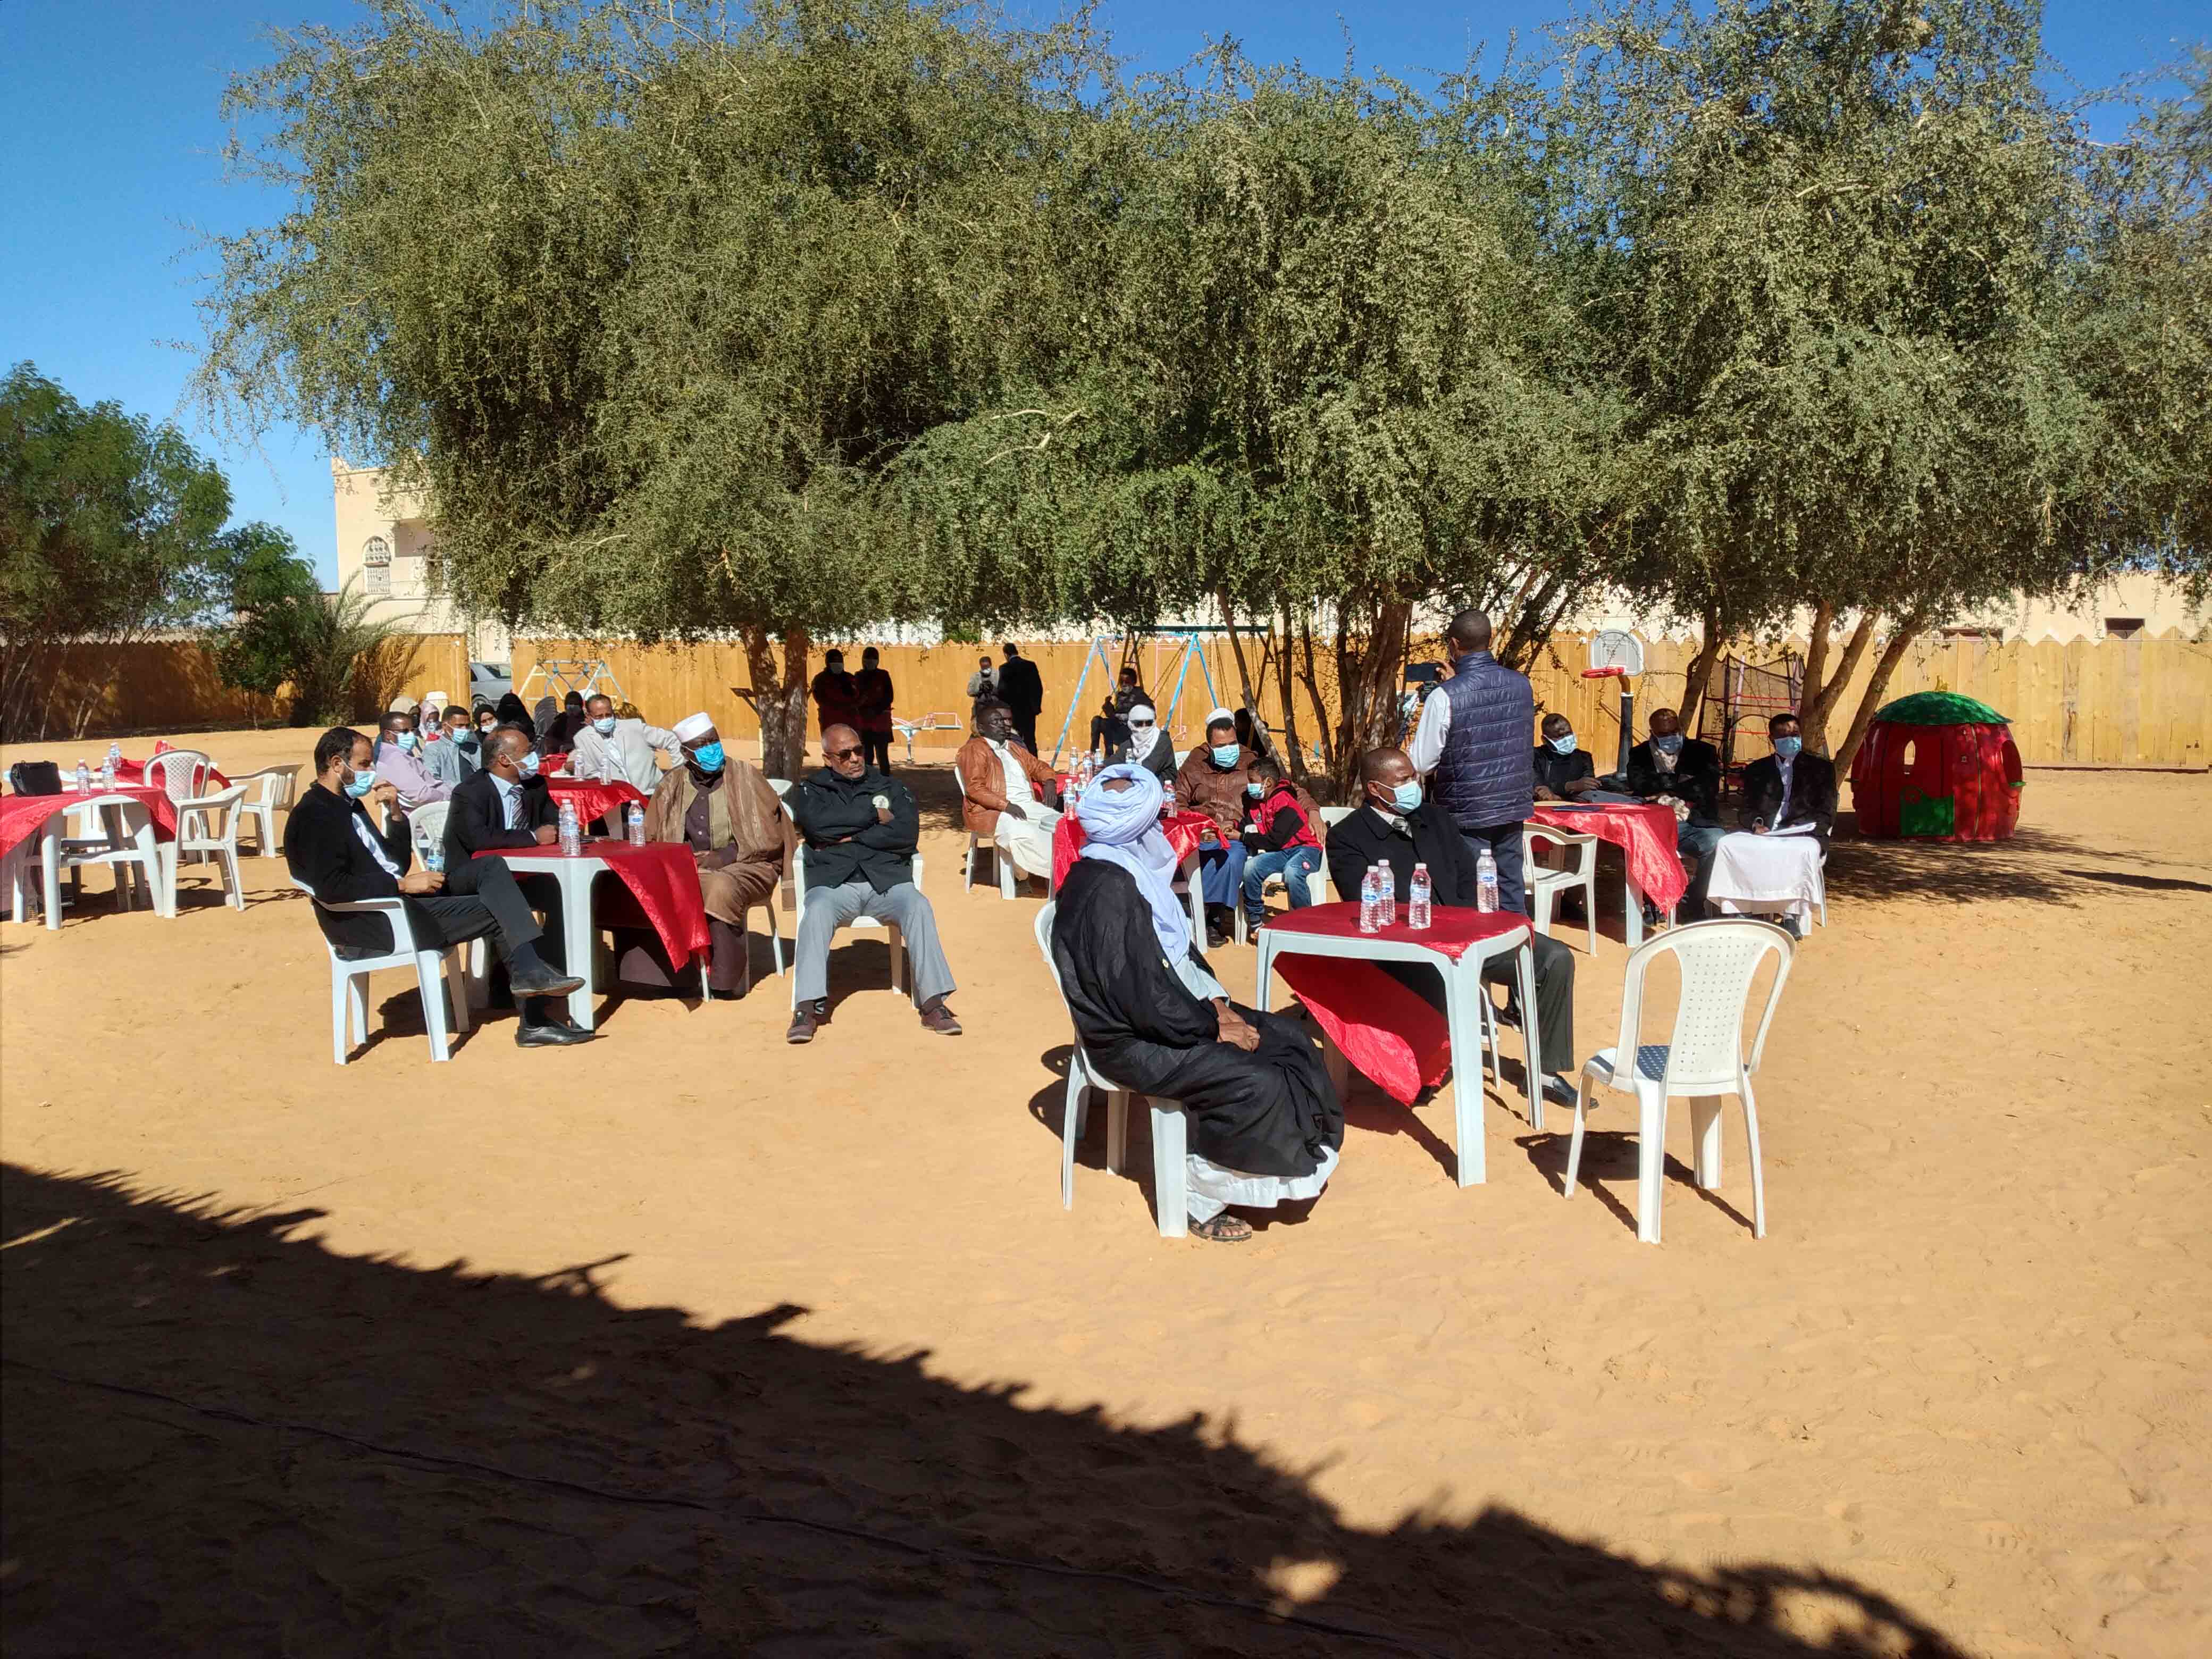 A USIP-hosted event commemorating International Day of Persons with Disabilities in Ubari, Libya, Dec. 3, 2020.